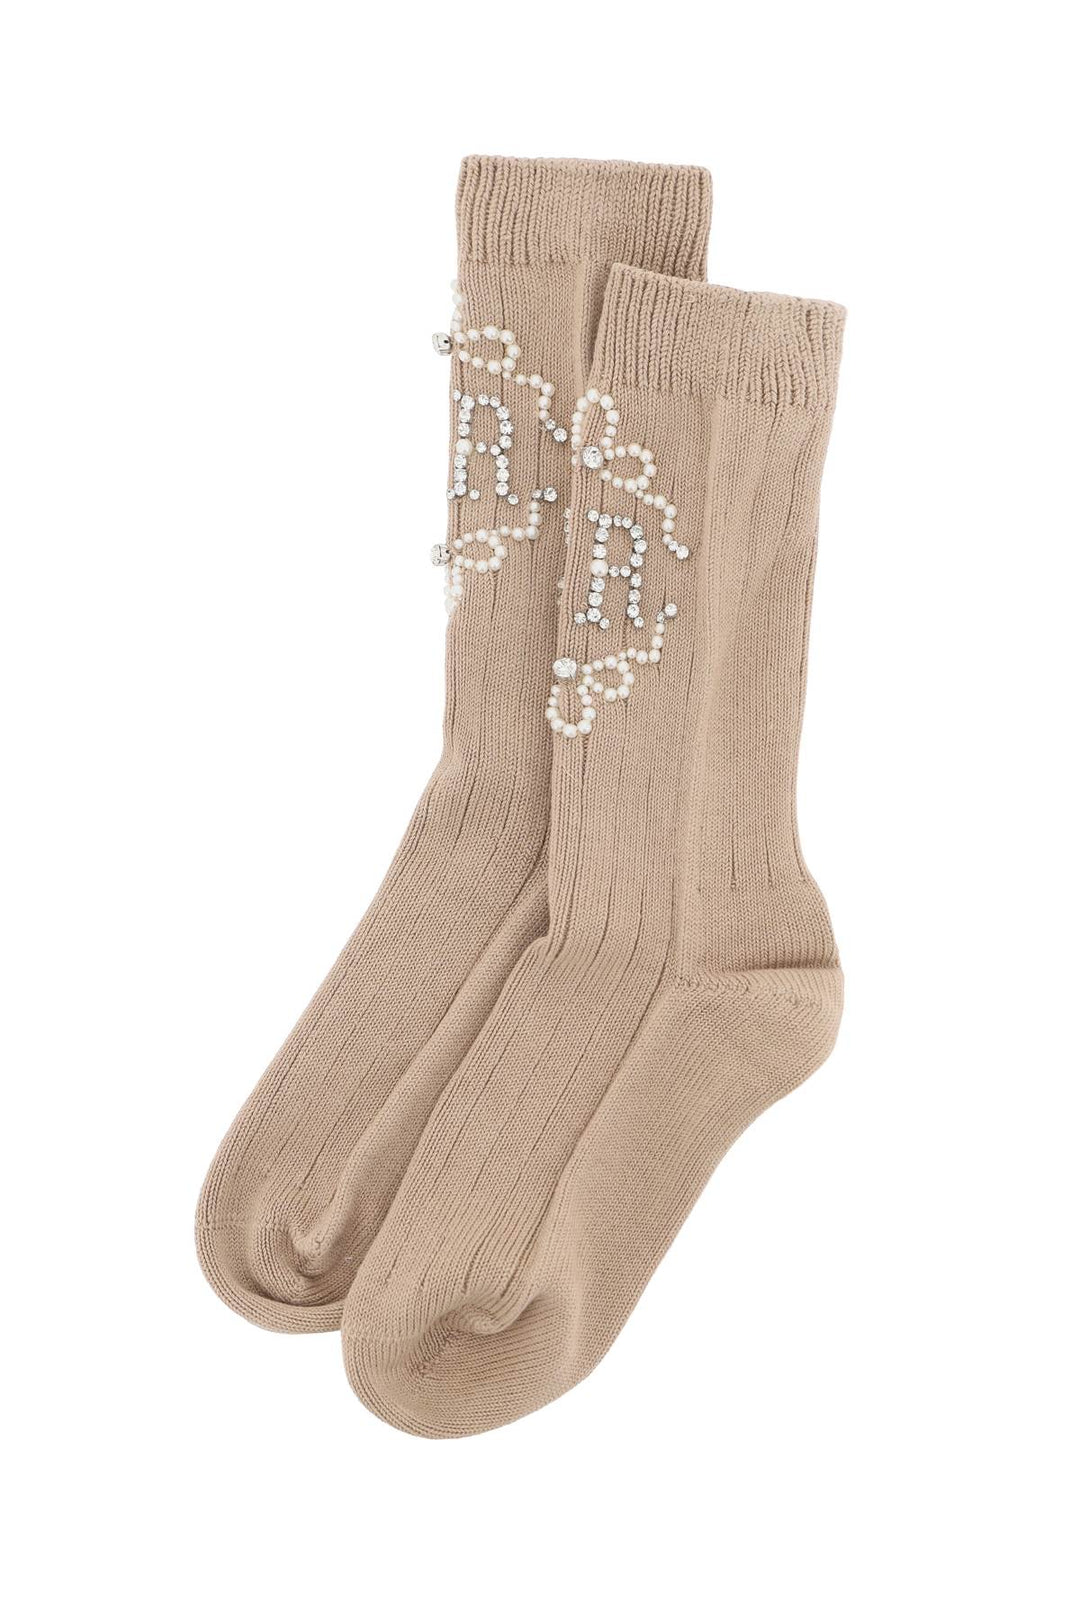 Simone Rocha Sr Socks With Pearls And Crystals   Beige